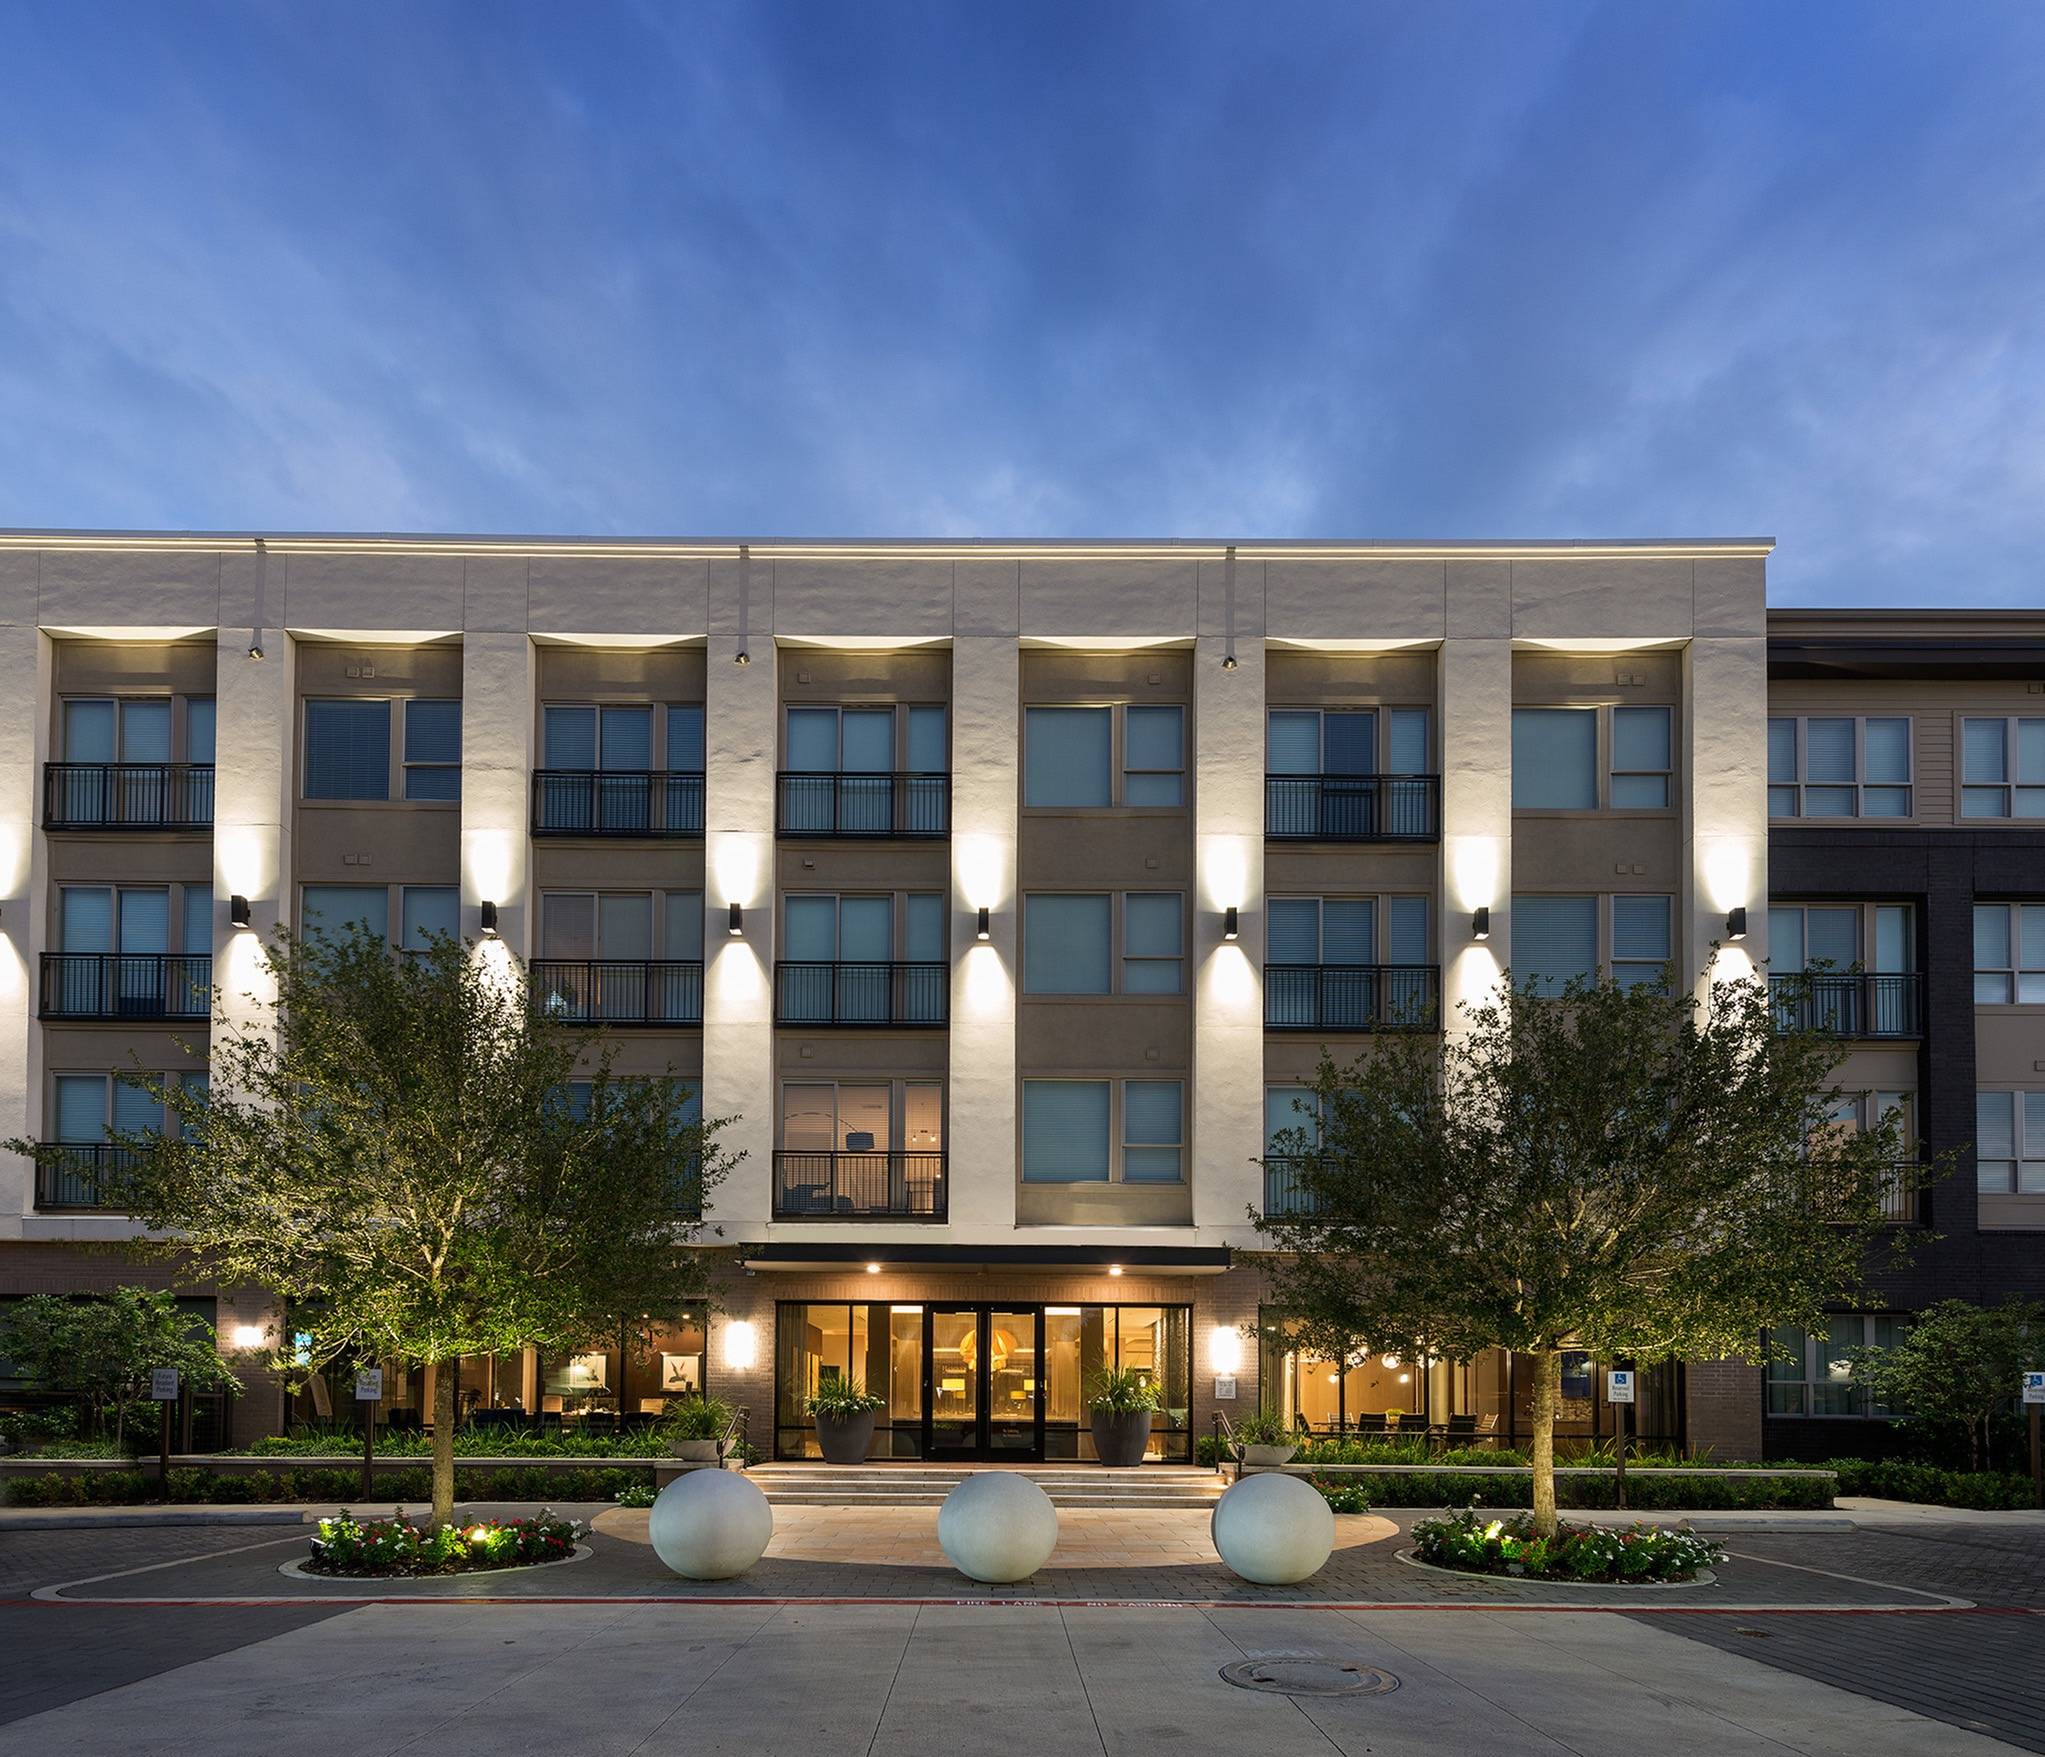 Hanover at Clearfork - Apartments in Fort Worth, TX